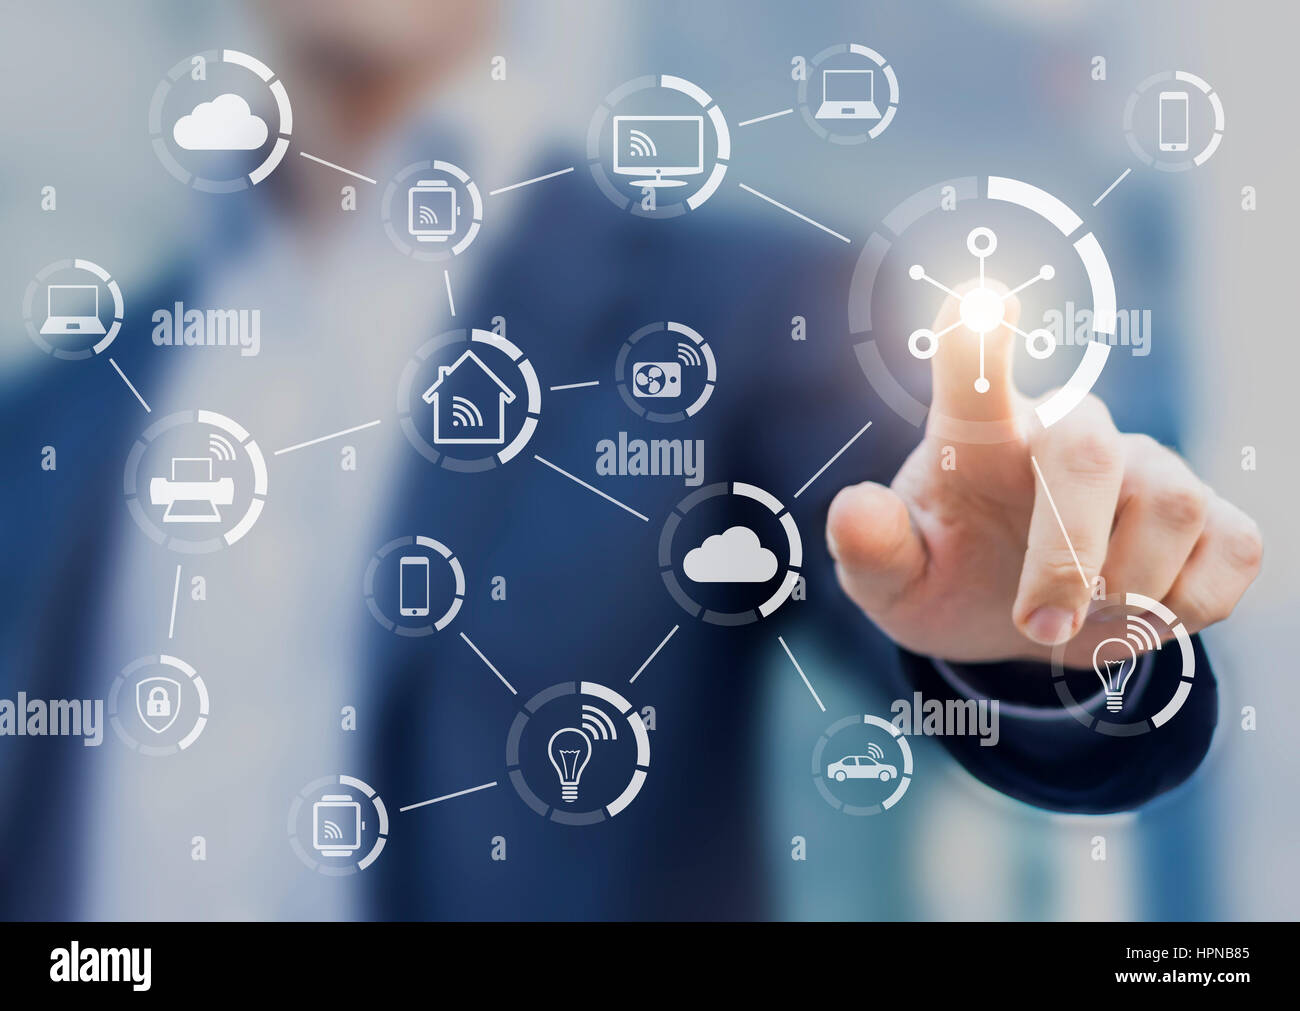 Internet of things (IOT) concept with a network of connected objects exchanging data with wireless connection, person touching virtual screen, smart h Stock Photo